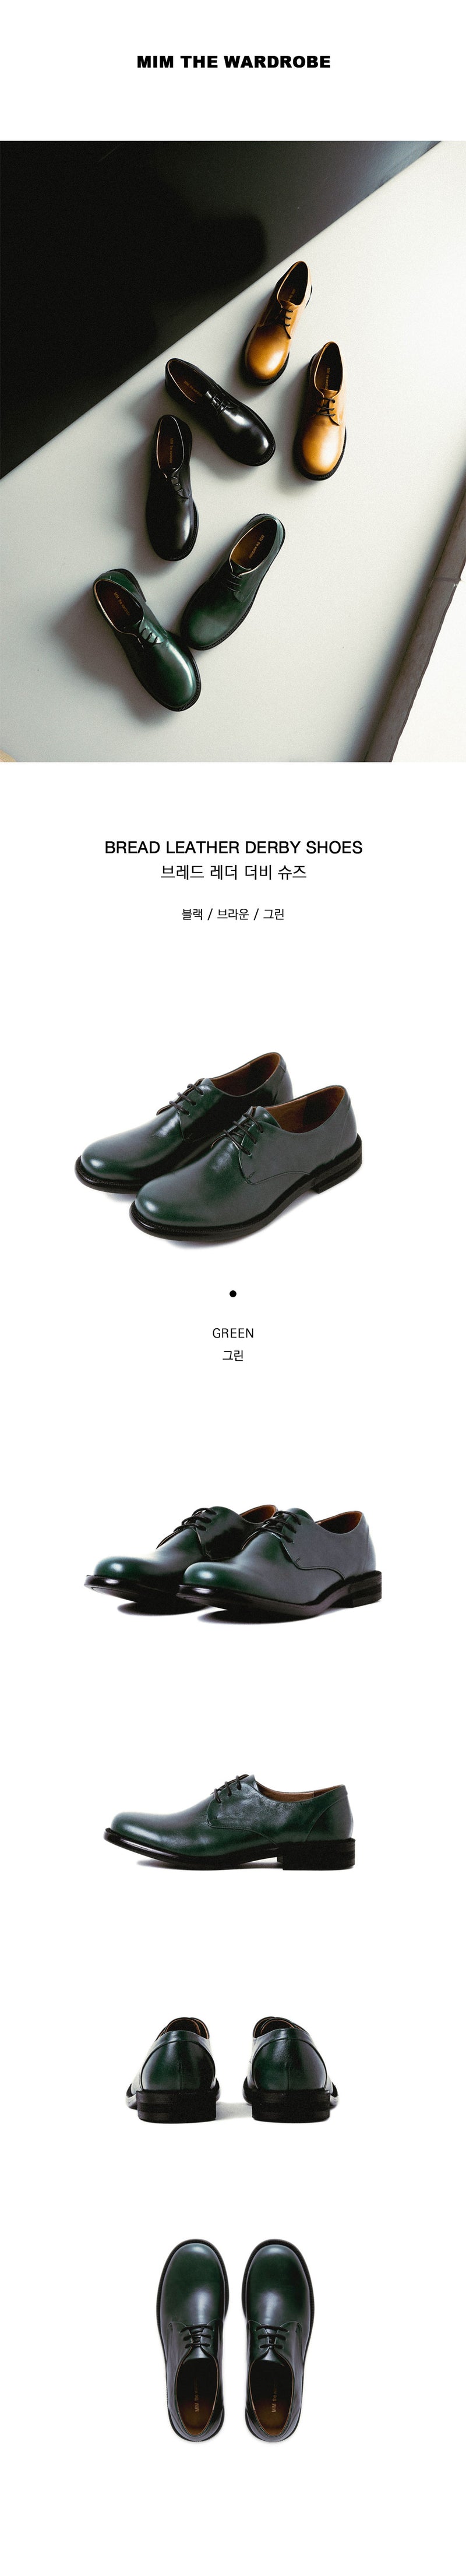 BREAD LEATHER DERBY SHOES GREEN